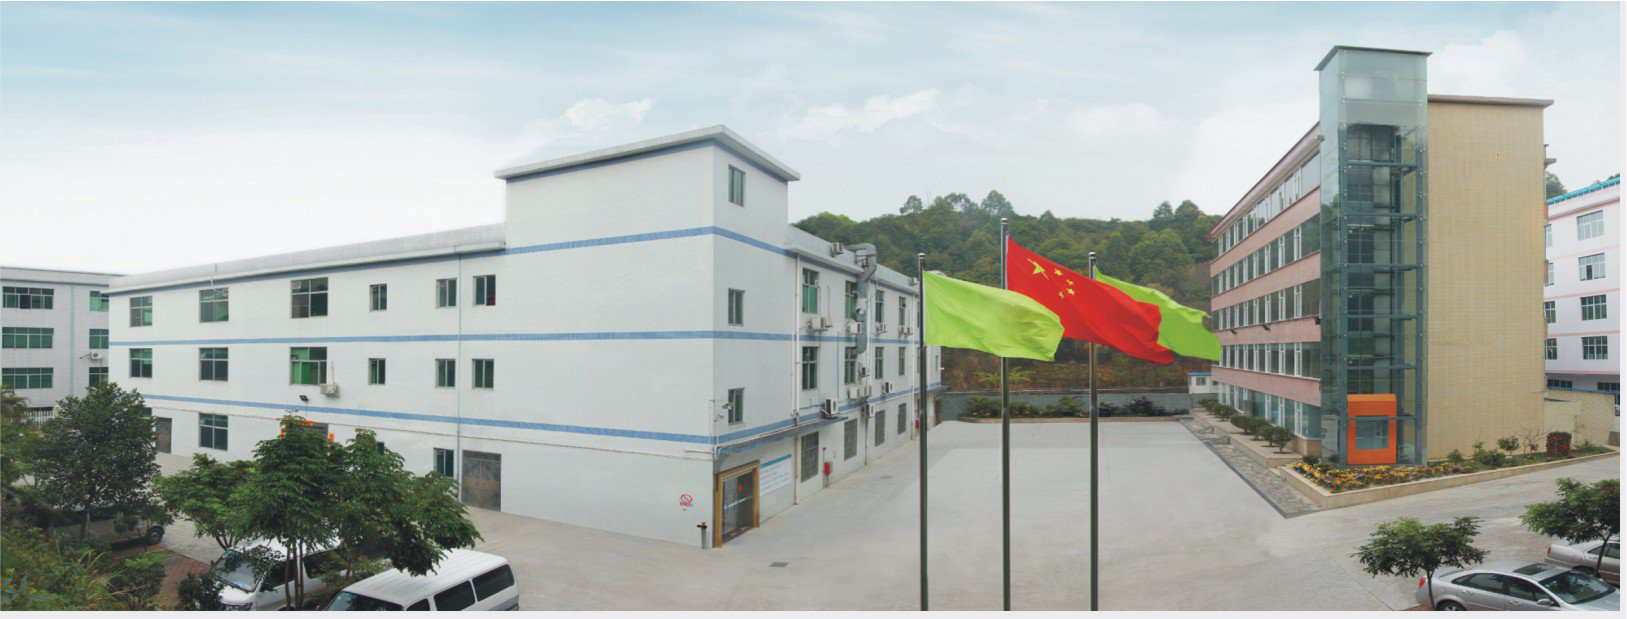 factory in Guangzhou; flavor and fragrance supplier